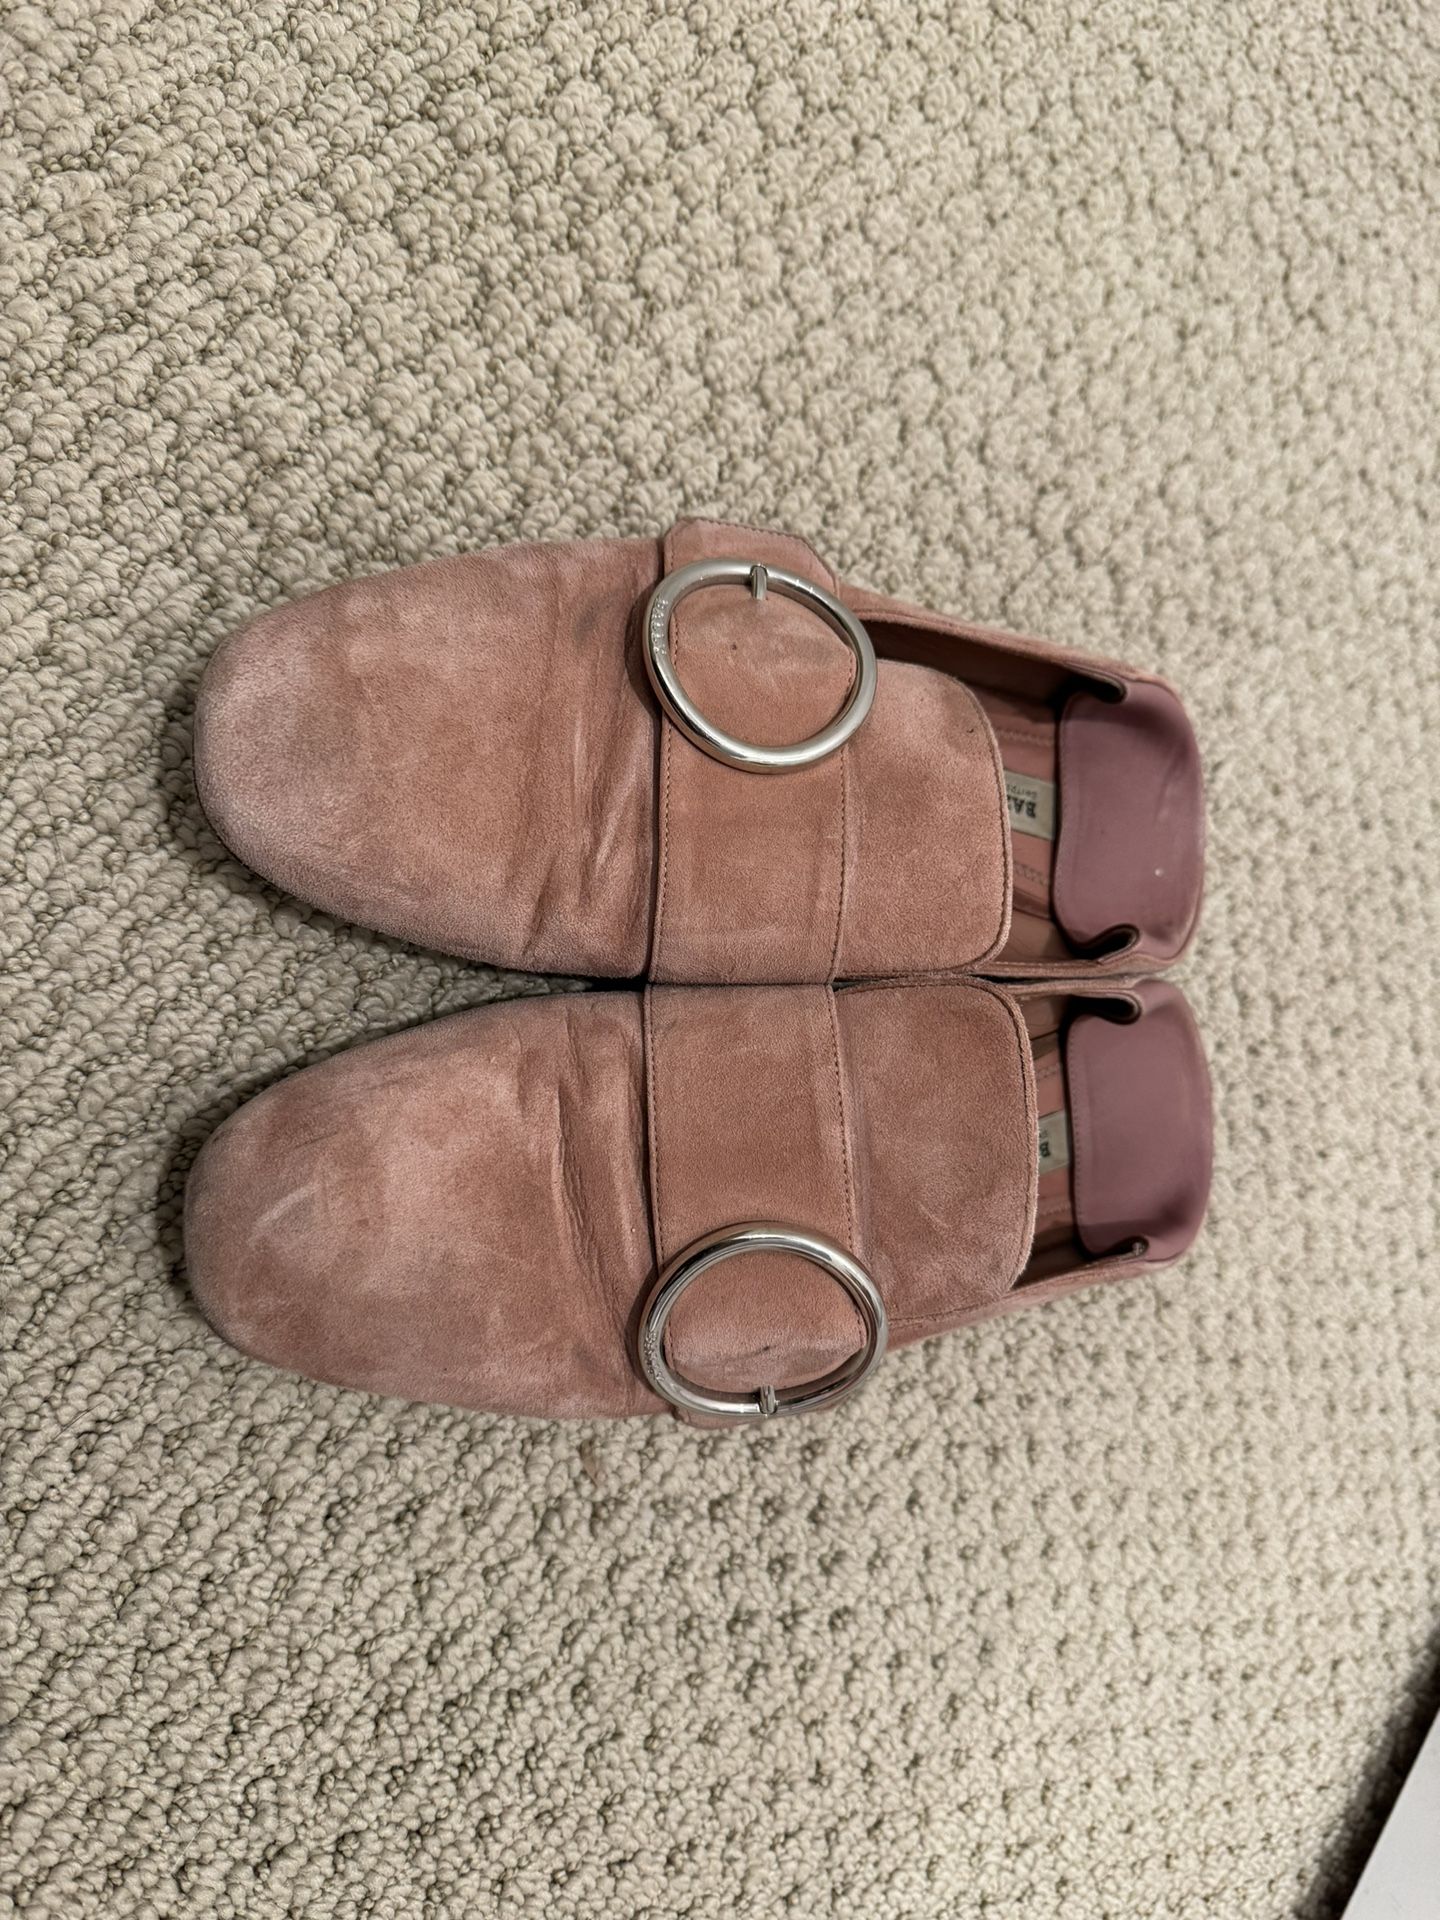 Bally Pink Leather Flat Slip On Shoes - EU38 Made In Italy